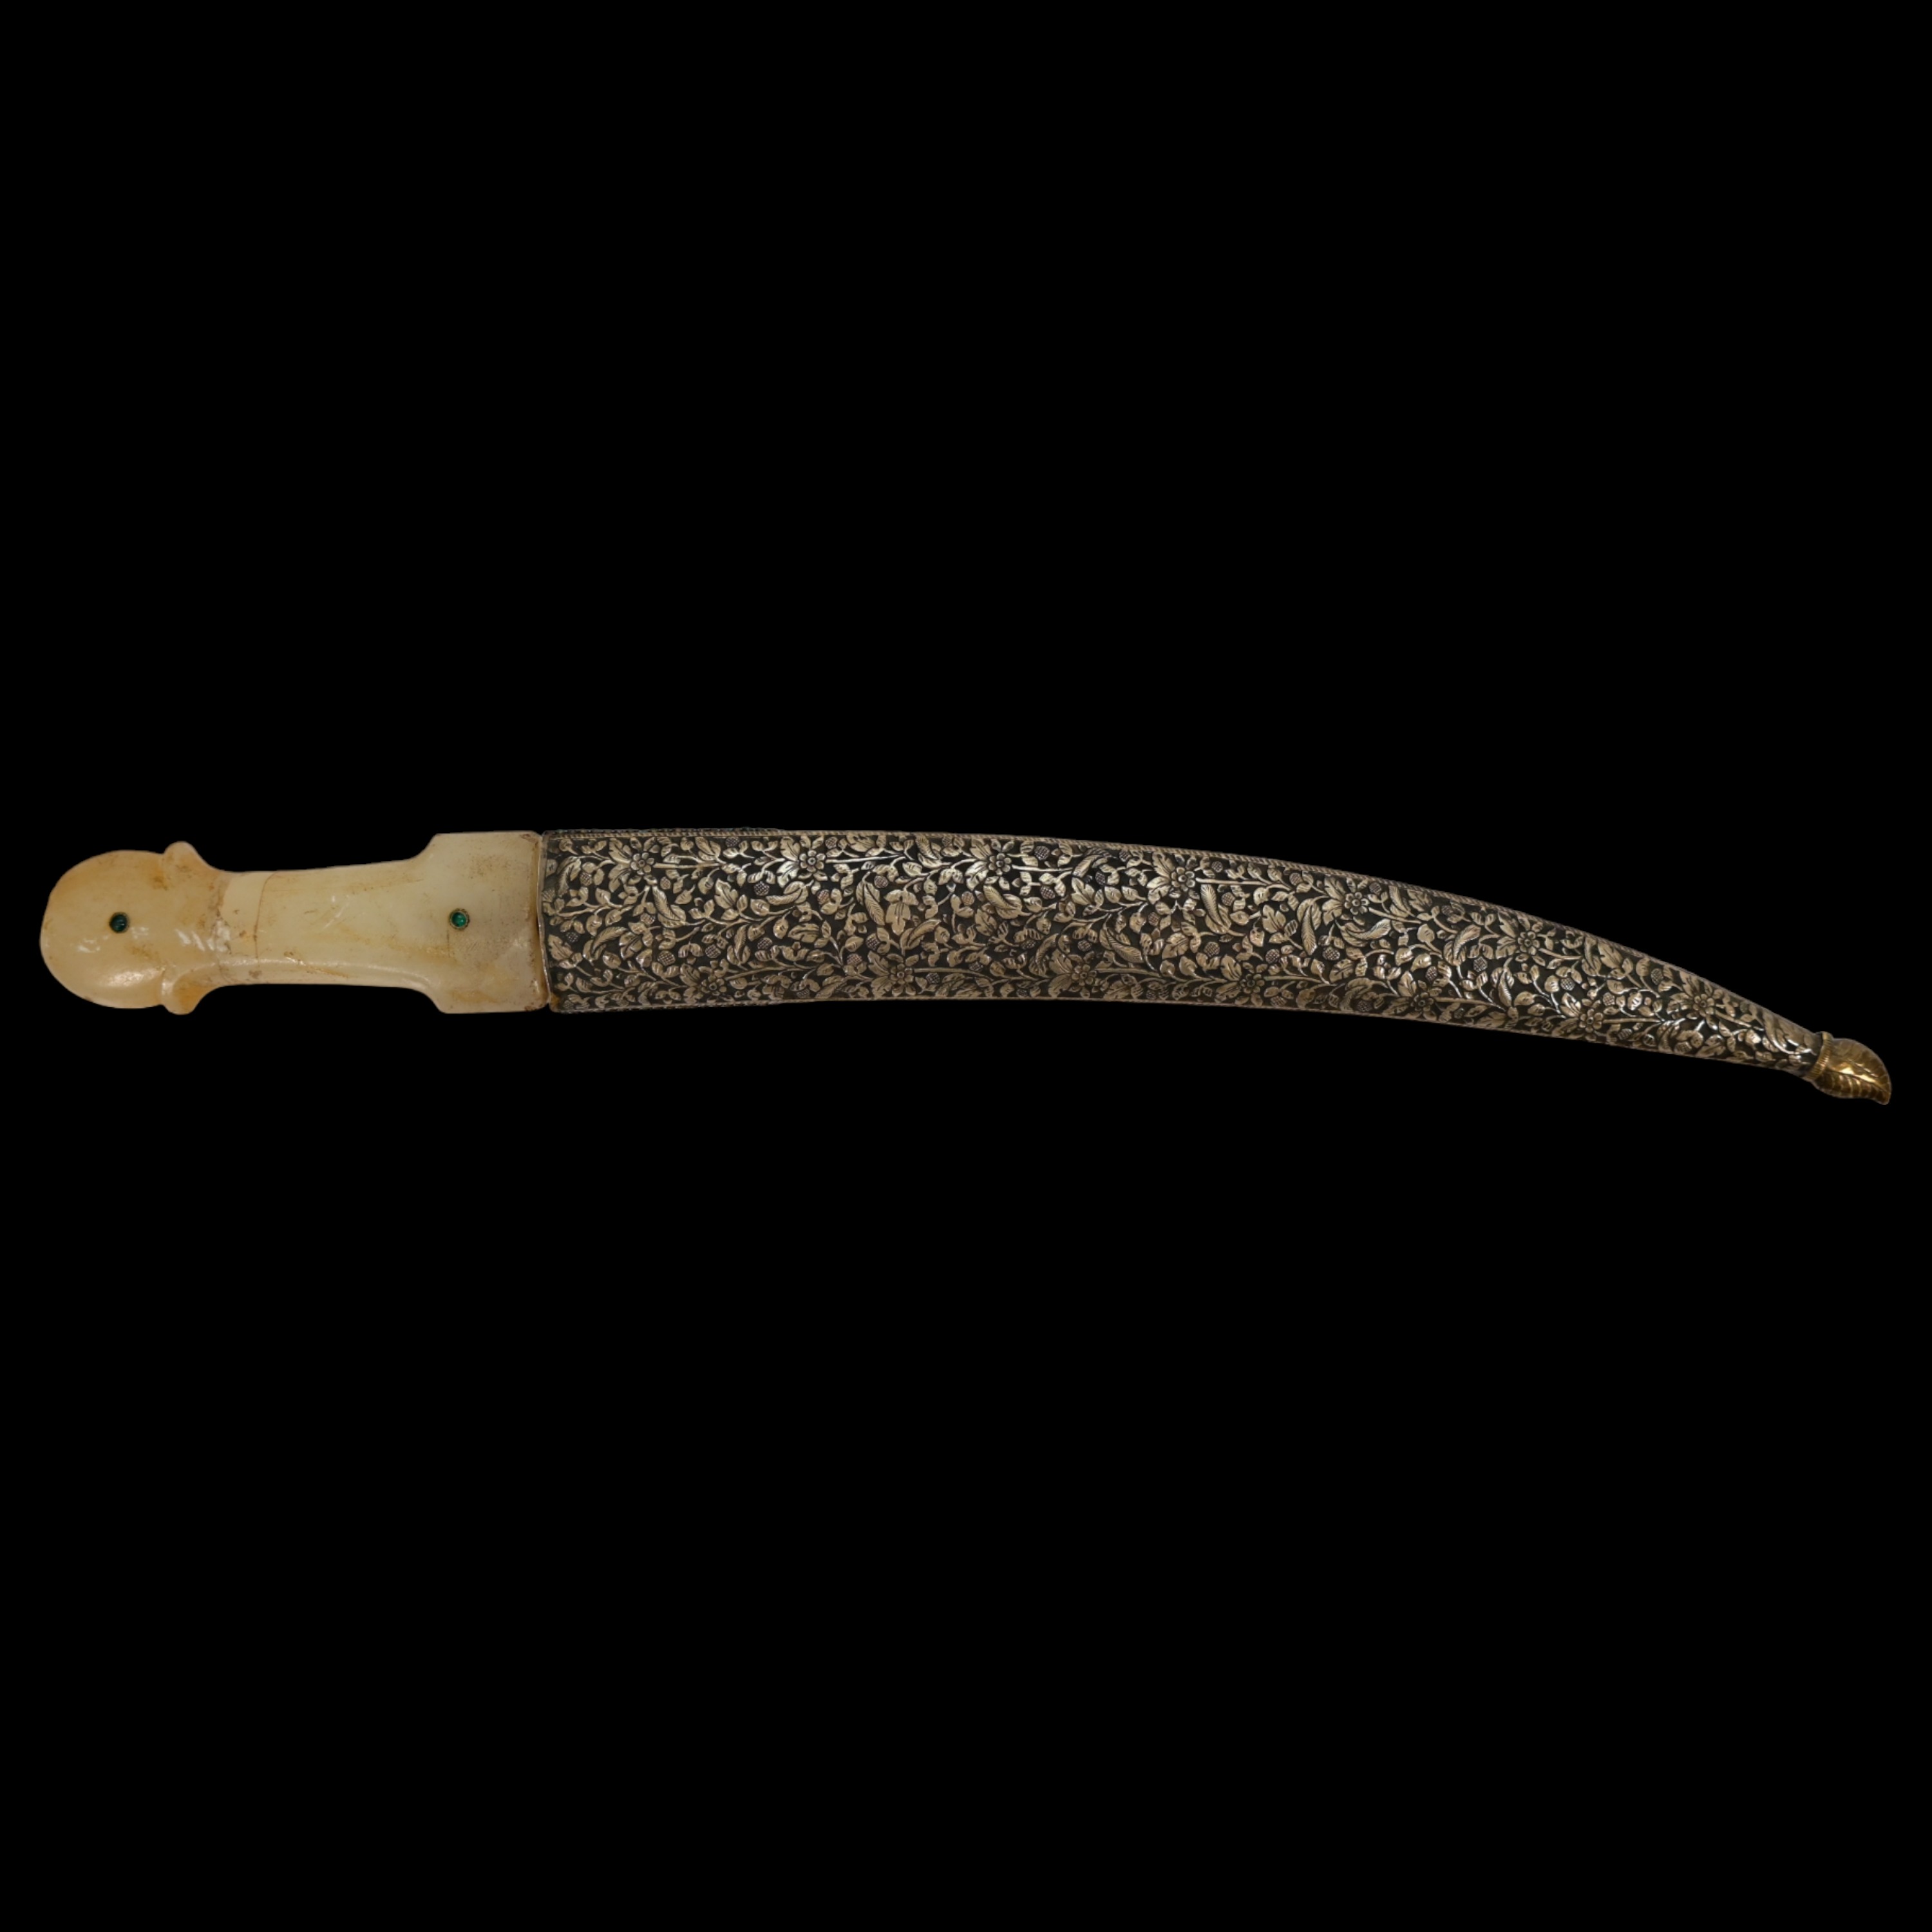 Very rare Dagger with jade handle, Wootz blade, precious stones and gold, Ottoman Empire, 18th C. - Image 3 of 19